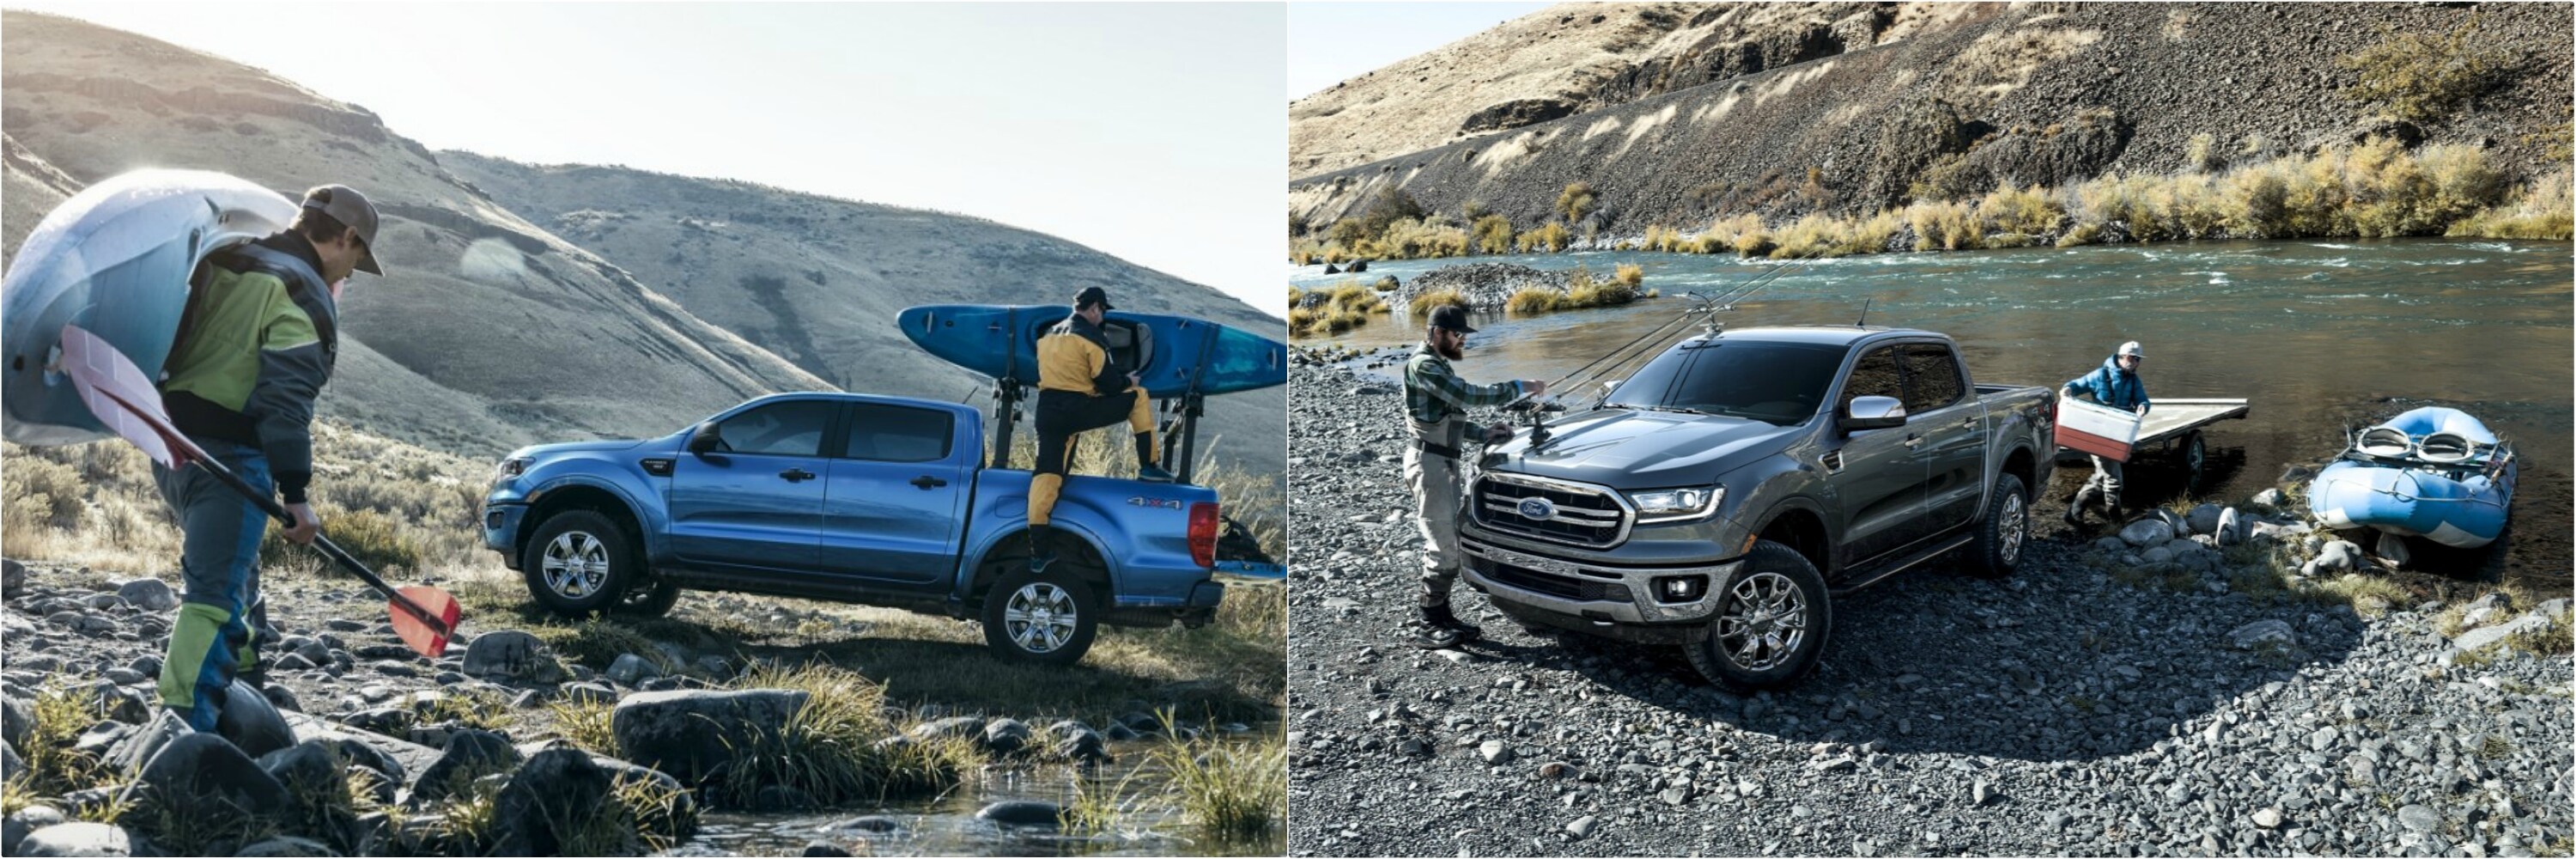 Two men load kayaks in a 2020 Ford Ranger alongside a 2021 Ford Ranger towing small boats in rugged terrain